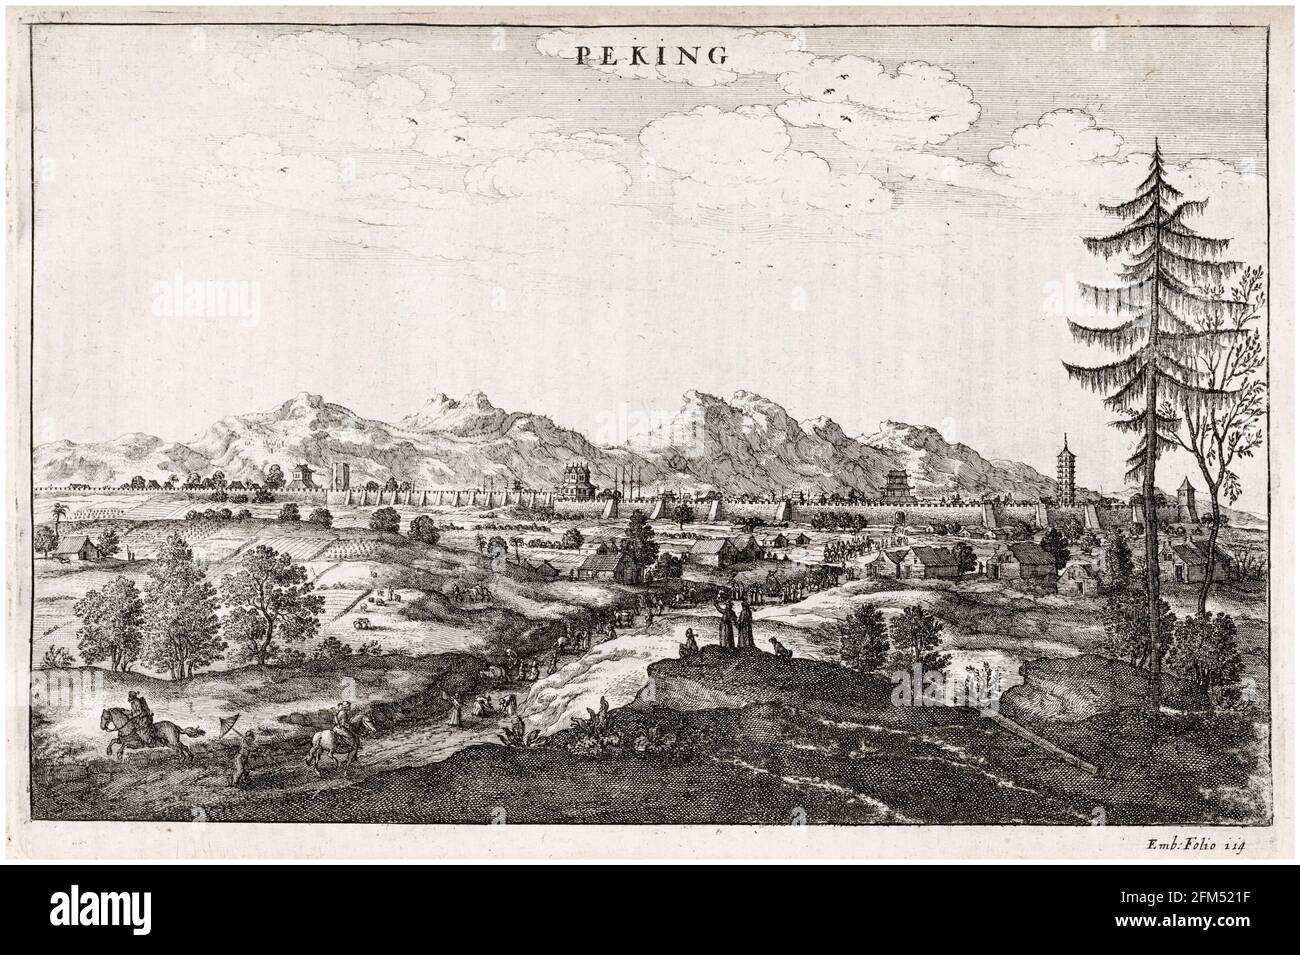 City walls of Peking (Beijing) and landscape: from the book An Embassy from the East-India Company of the United Provinces to the Grand Tartar Cham, Emperor of China, by Johannes Nieuhof, engraving by Wenceslaus Hollar, 1669 Stock Photo